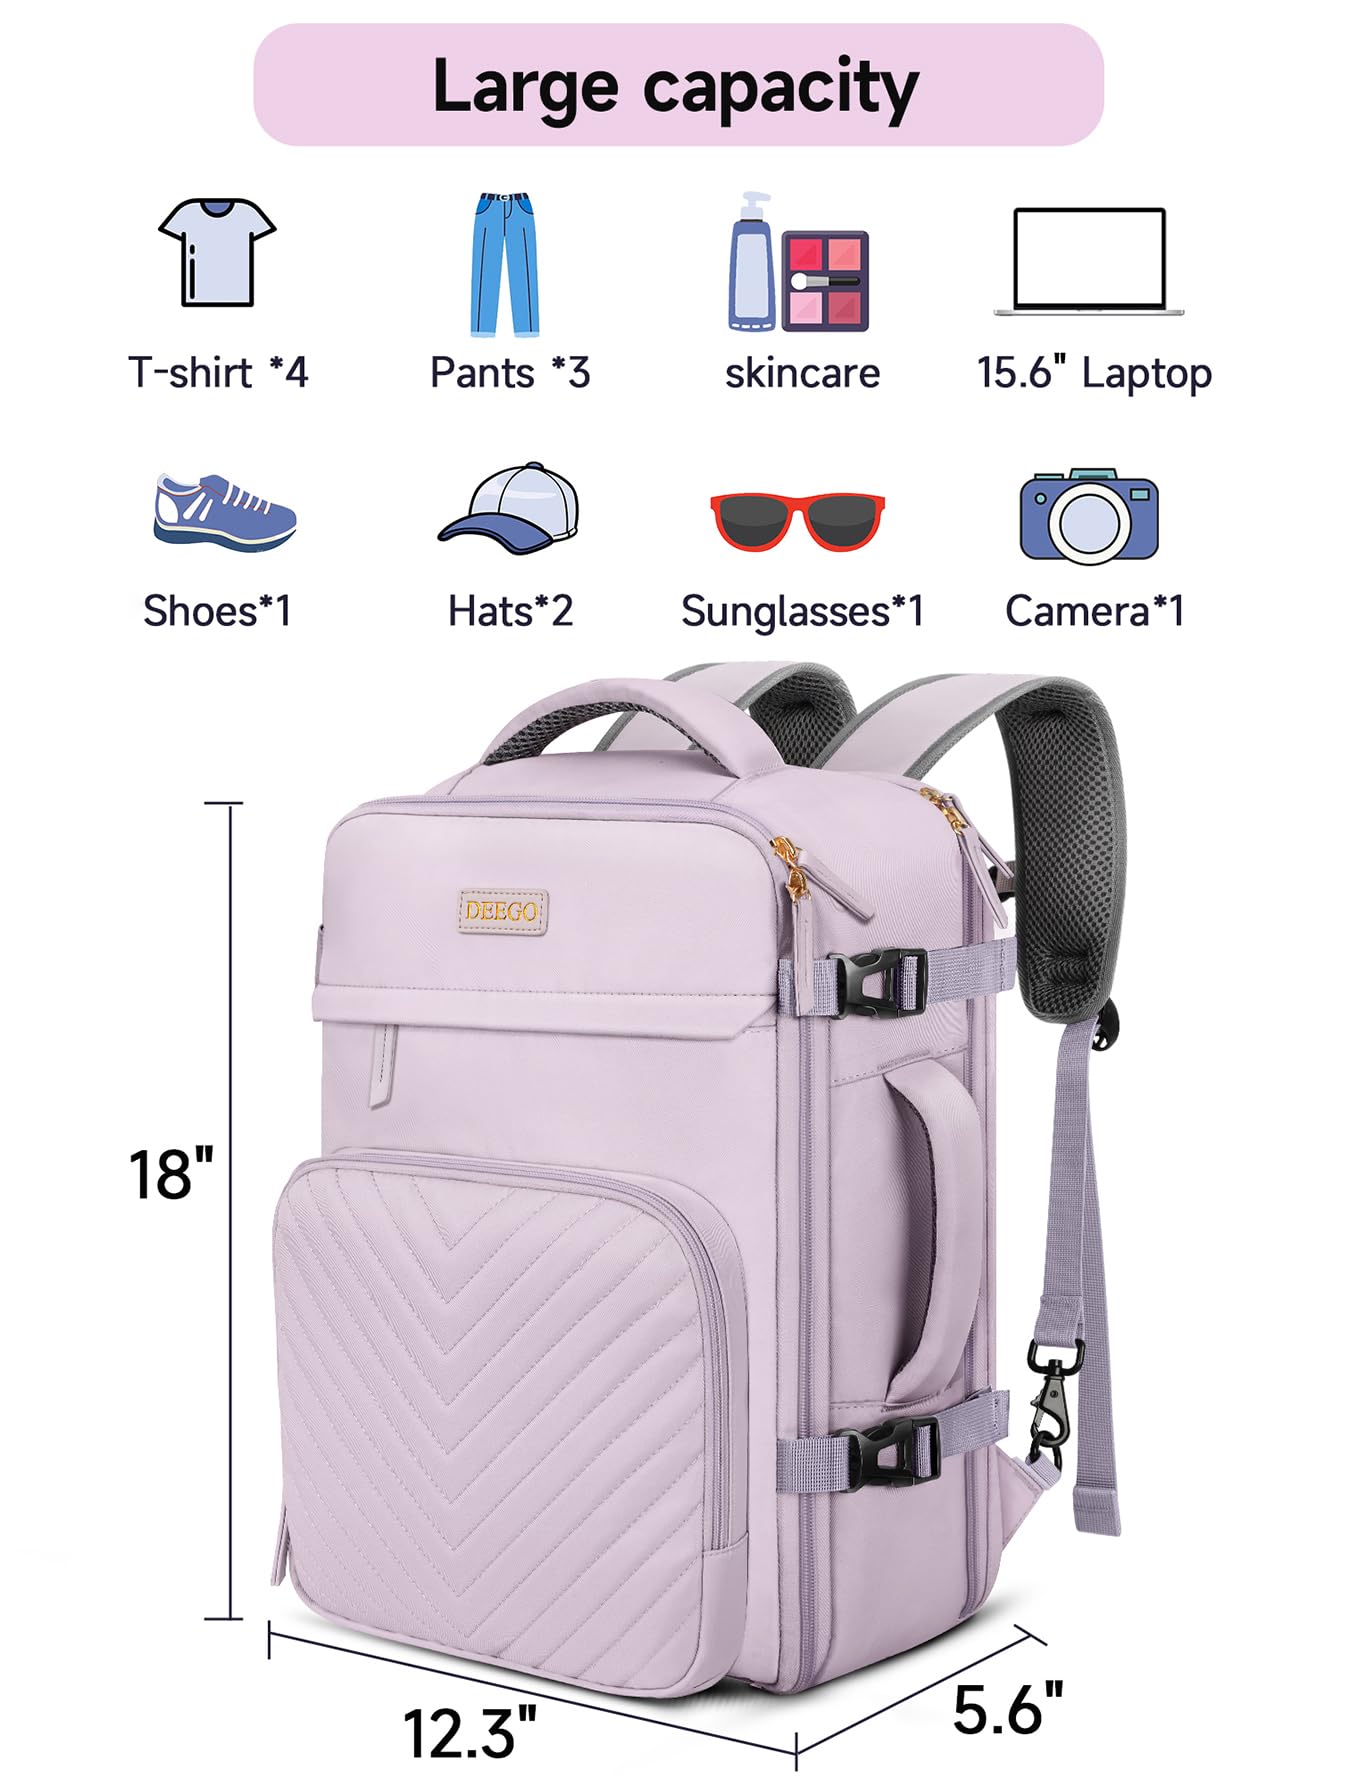 Carry on Backpack for Women, Travel Backpack for Women Airline Approved, Flight Luggage Backpack with Toiletry Bag, College Backpack Fits 15.6 Inch Laptop, Waterproof Casual Daypack Weekender, Purple